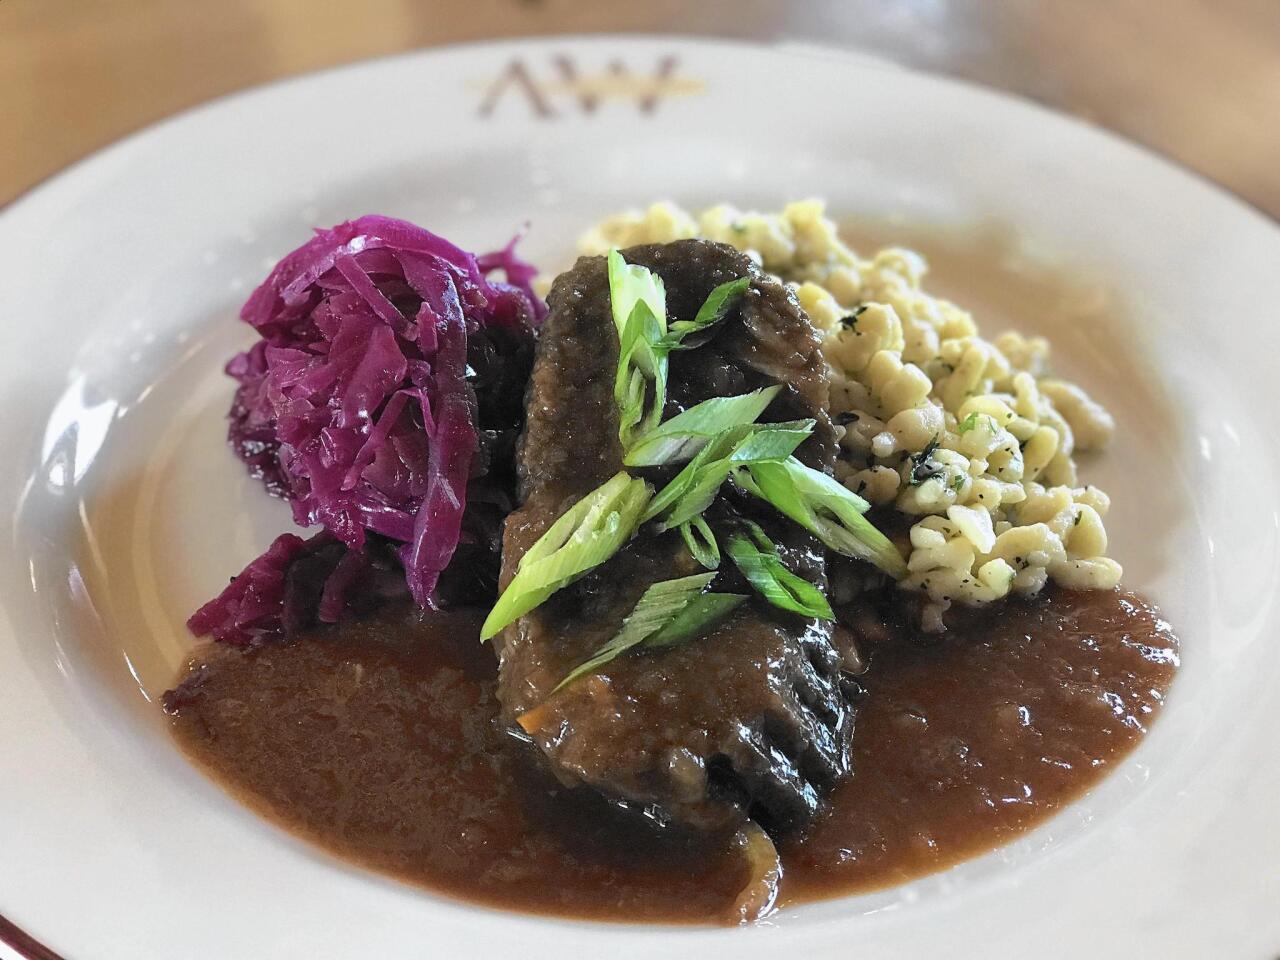 Stick-to-your-ribs fare is on offer at Ale Works, where the German dish sauerbraten is based on the owners’ family recipe.